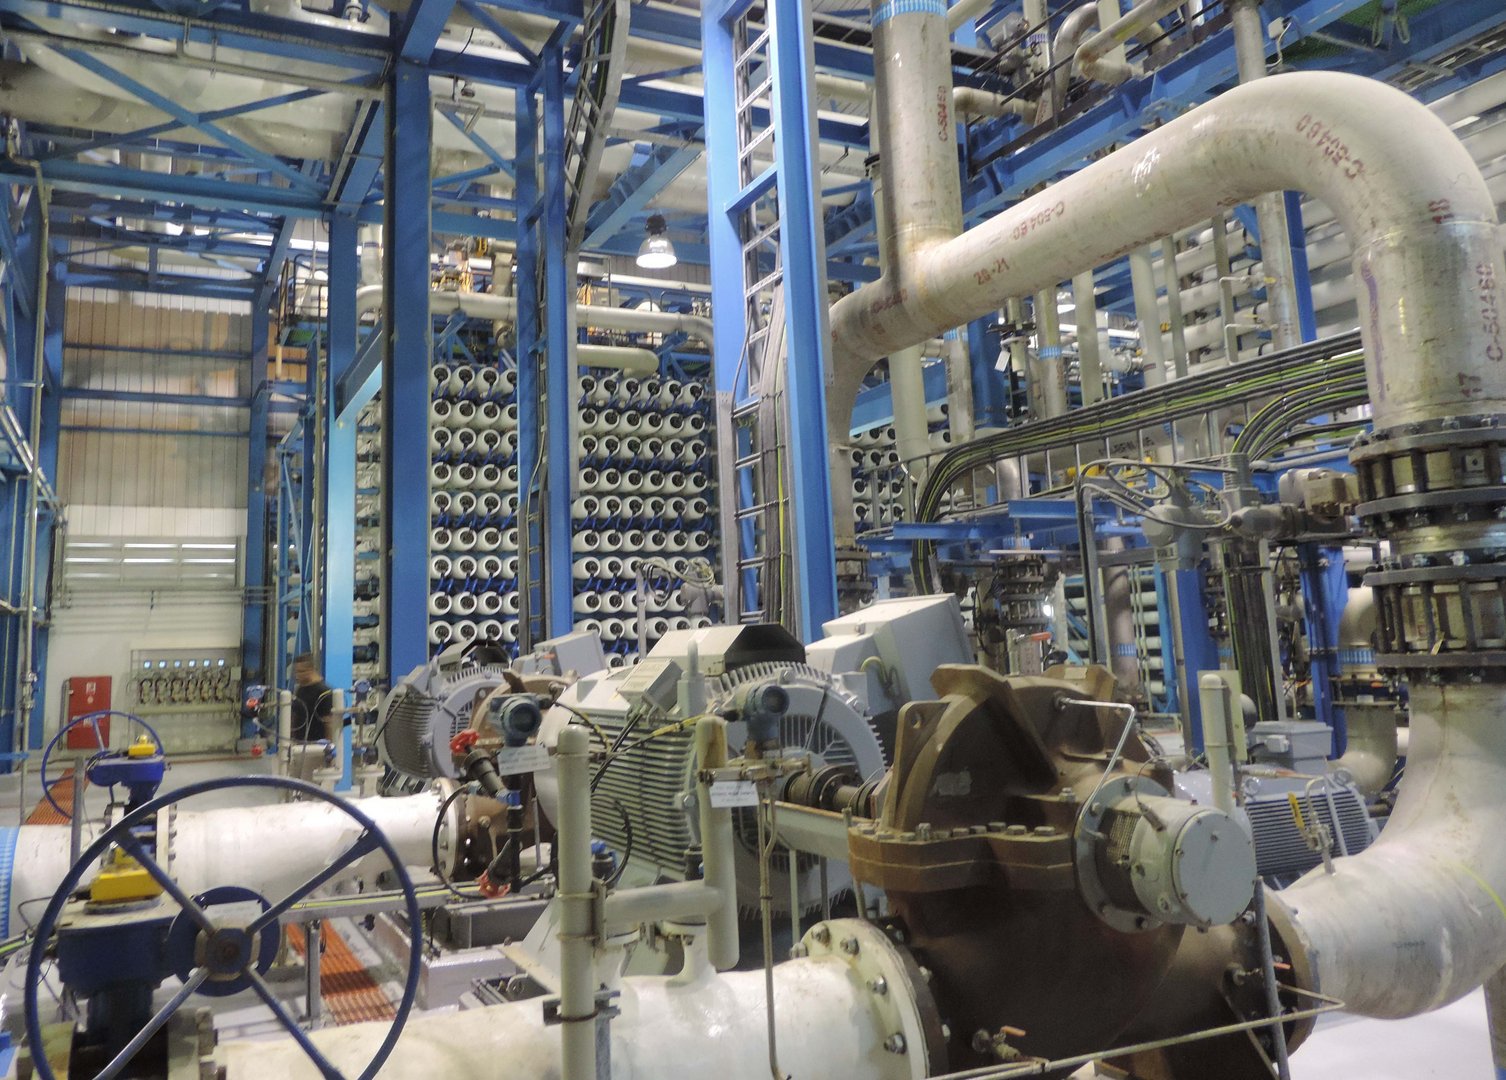 Two more desalination plants under consideration